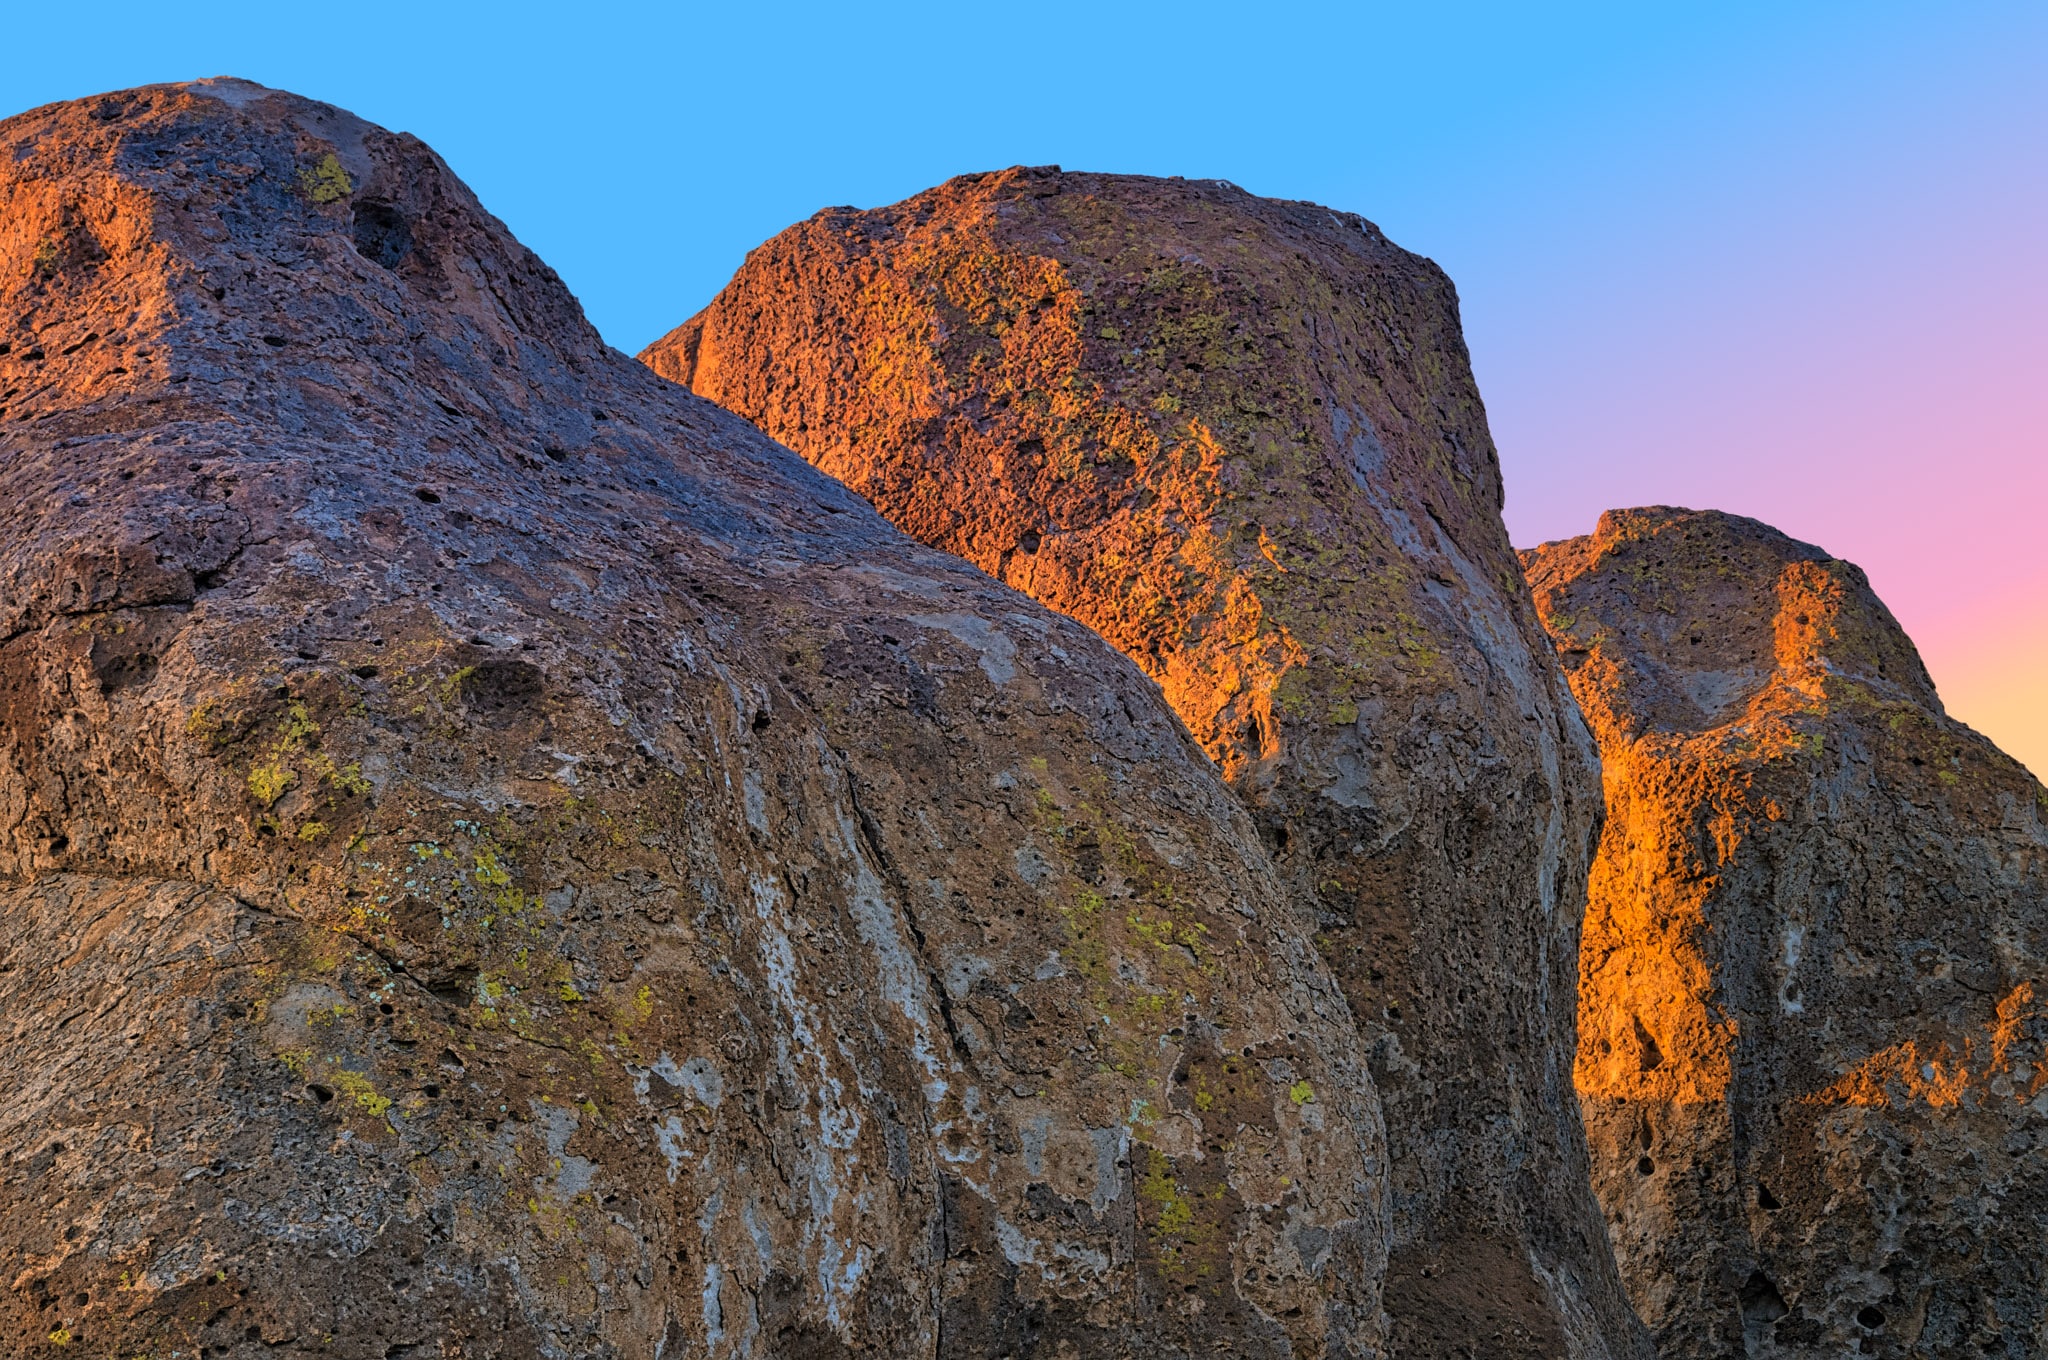 Alpenglow tinges the sky blue, pink, and yellow at sunset in City of Rocks State Park near Silver City, New Mexico.